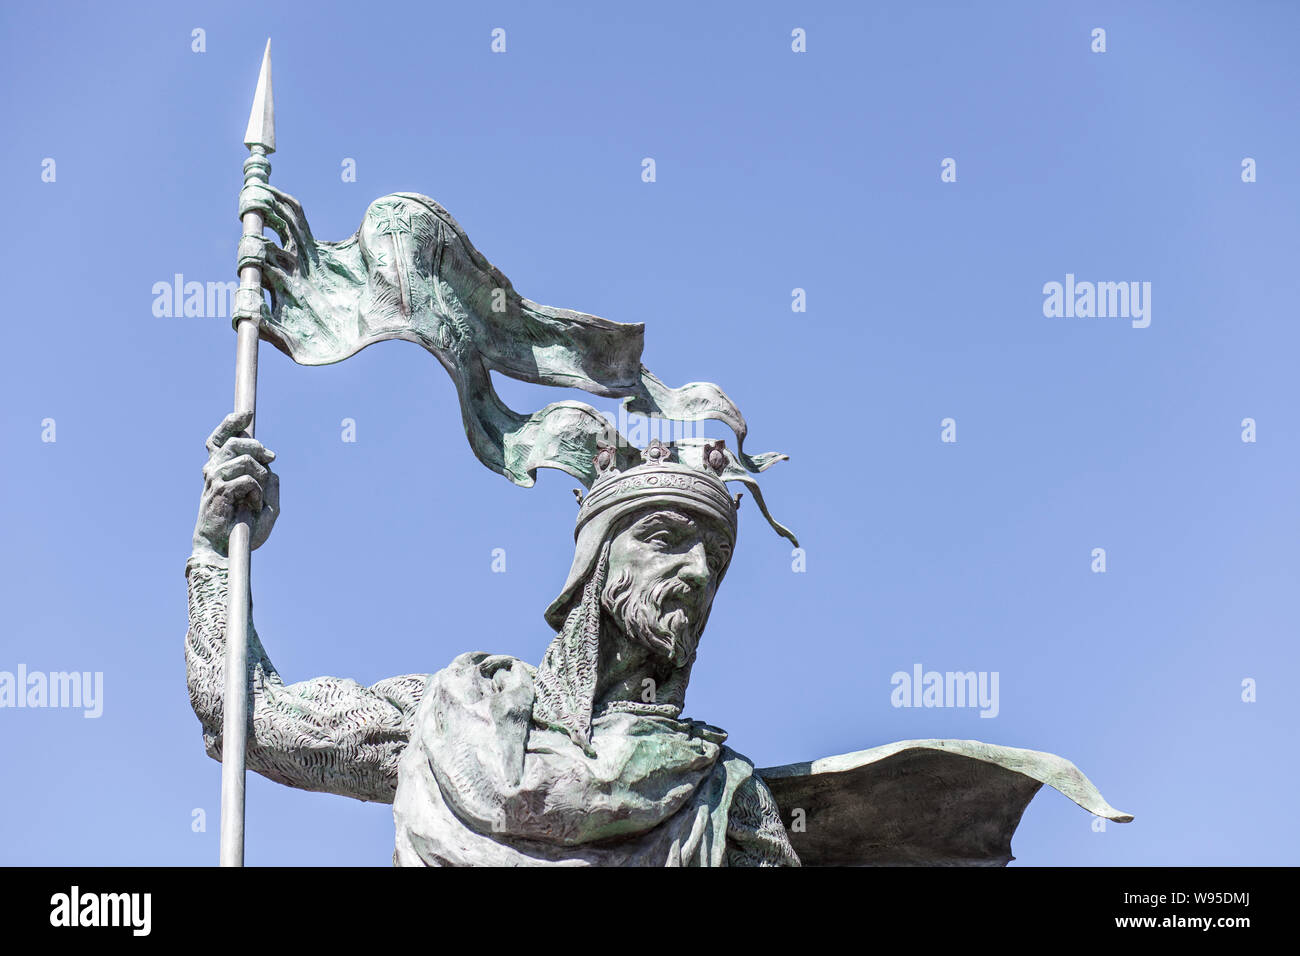 Leon, Spain - June 25th, 2019: Alfonso IX, 12th Century king of León and Galicia. Monument at Santo Martino square, León, Spain. Sculpted by Estanisla Stock Photo